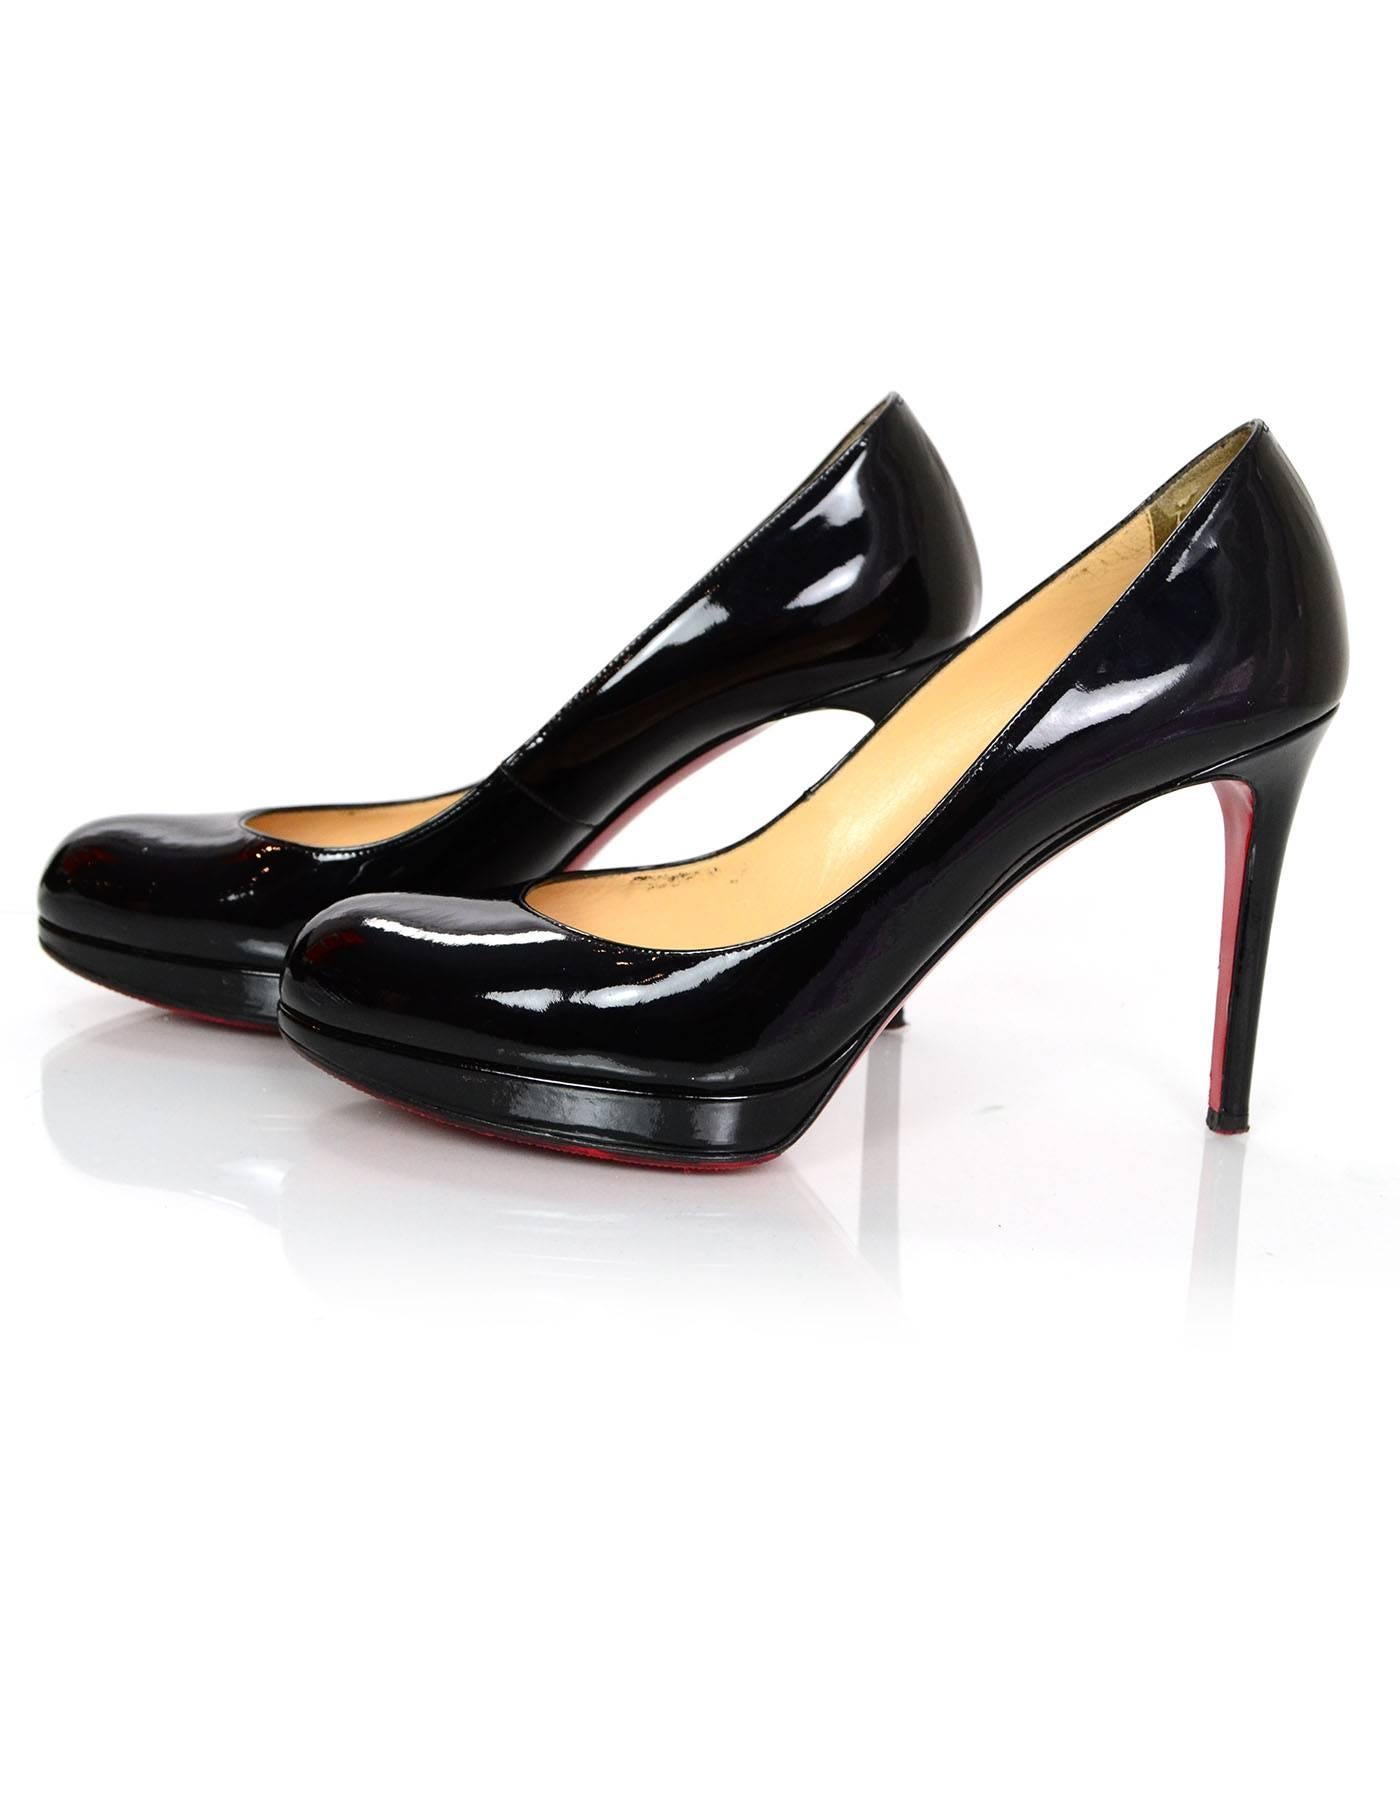 Christian Louboutin Black New Simple Patent Leather 100 Pumps Sz 37.5
Features front platform

Made In: Italy
Color: Black
Materials: Patent leather
Closure/Opening: Slide on
Sole Stamp: Christian Louboutin Made in Italy 37.5
Retail Price: